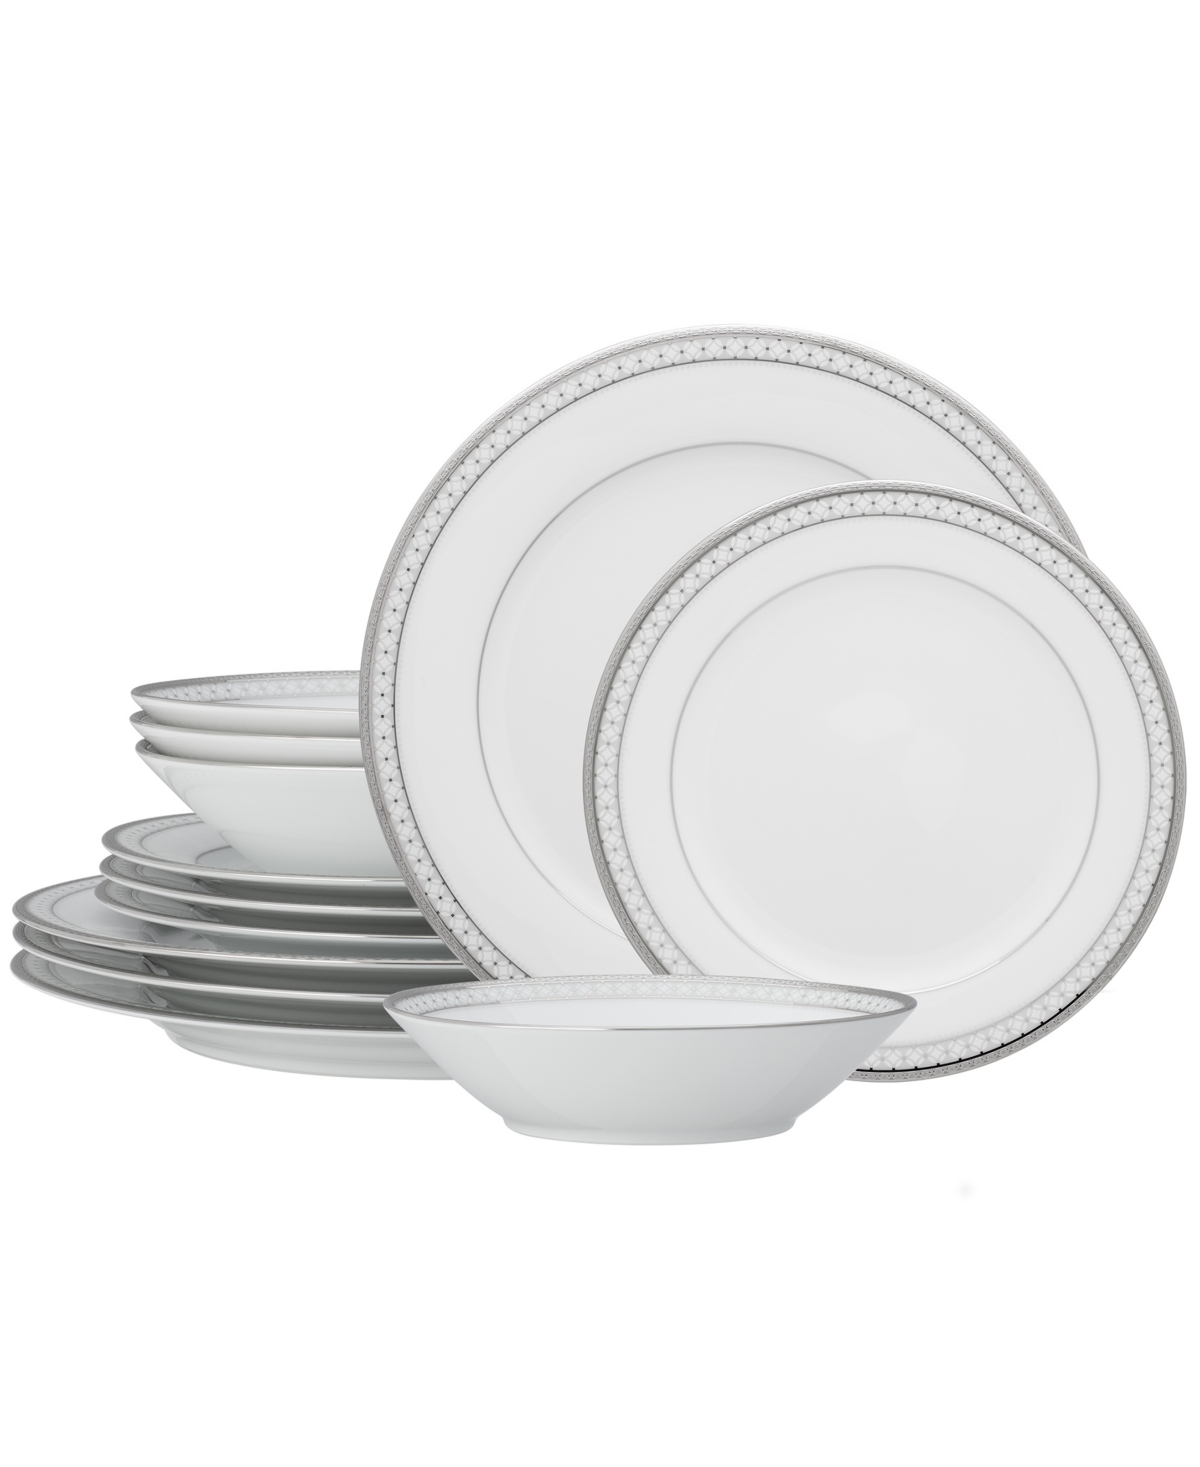 Noritake Rochester 12 Piece Set, Service For 4 In White And Platinum